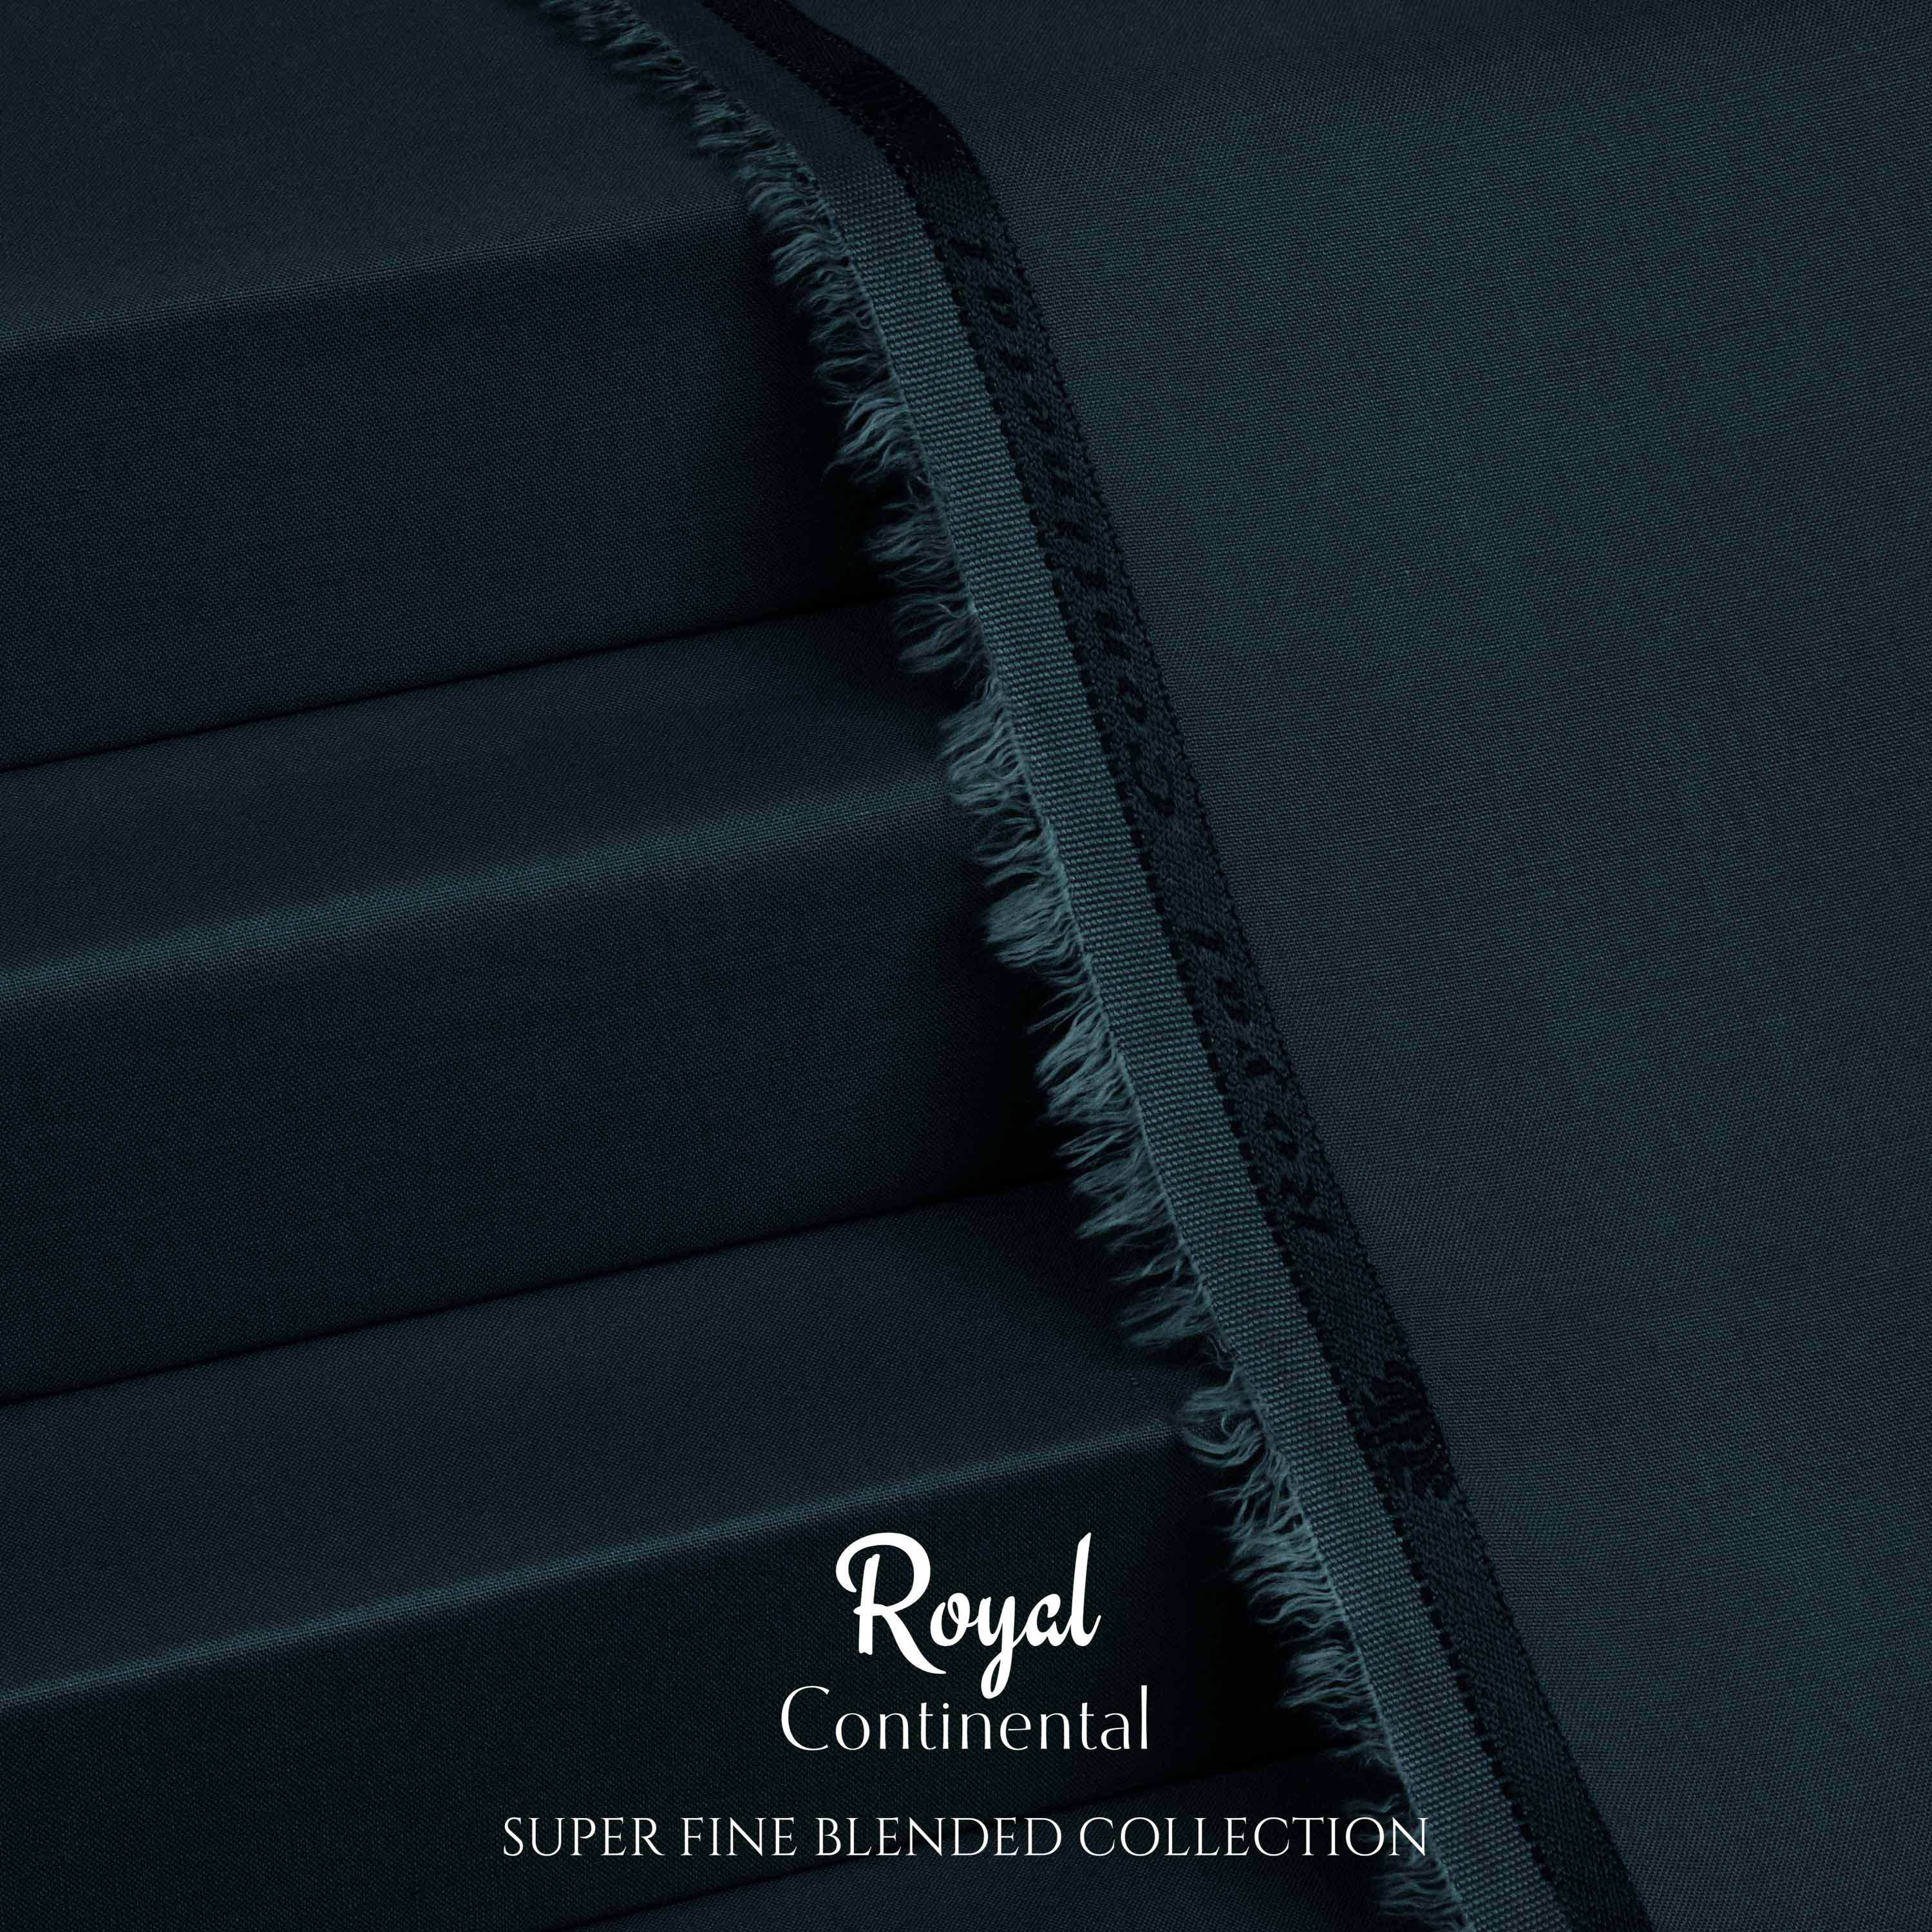 Royal Continental - Dark Teal - All Season Blended Collection